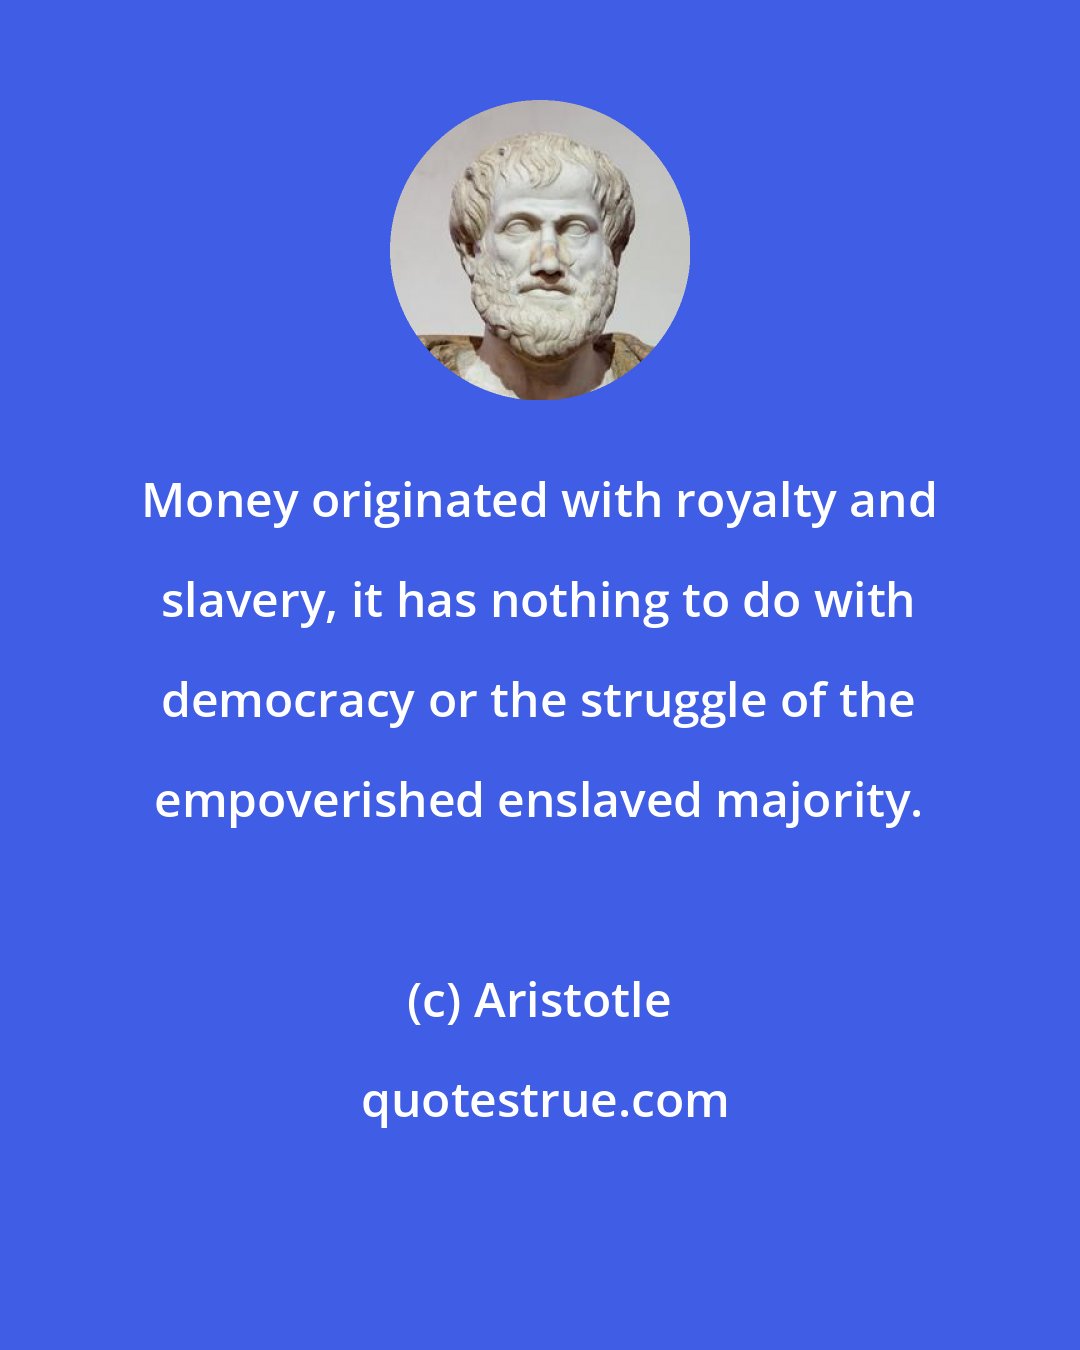 Aristotle: Money originated with royalty and slavery, it has nothing to do with democracy or the struggle of the empoverished enslaved majority.